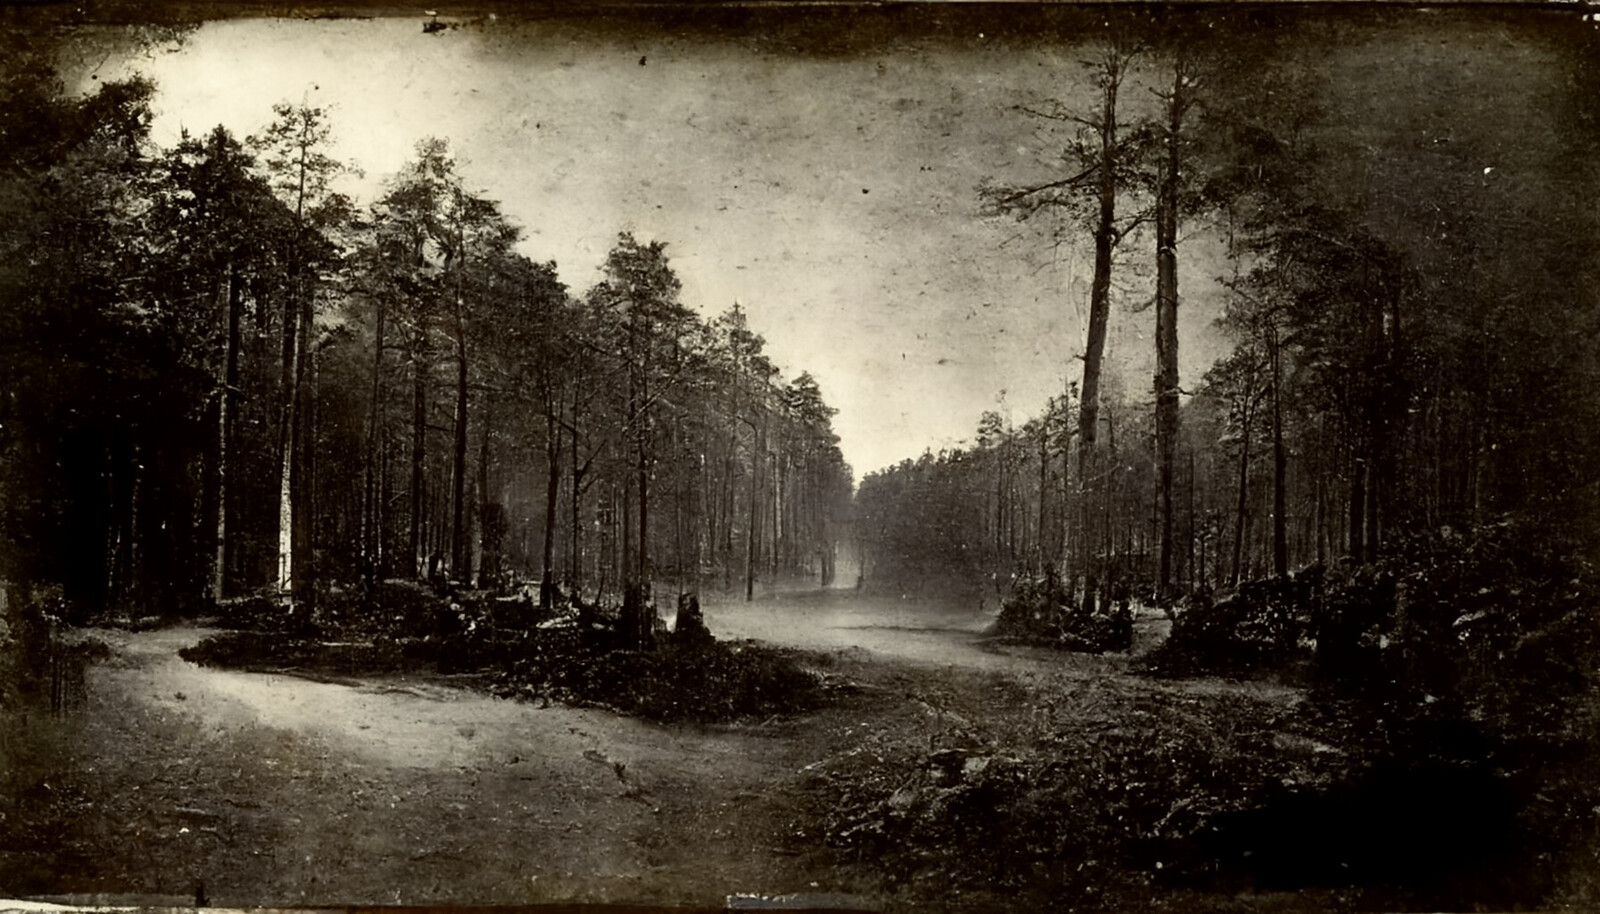 Forest Landscape #12
c. 1881
Photograph
'The road to Cer Mare'